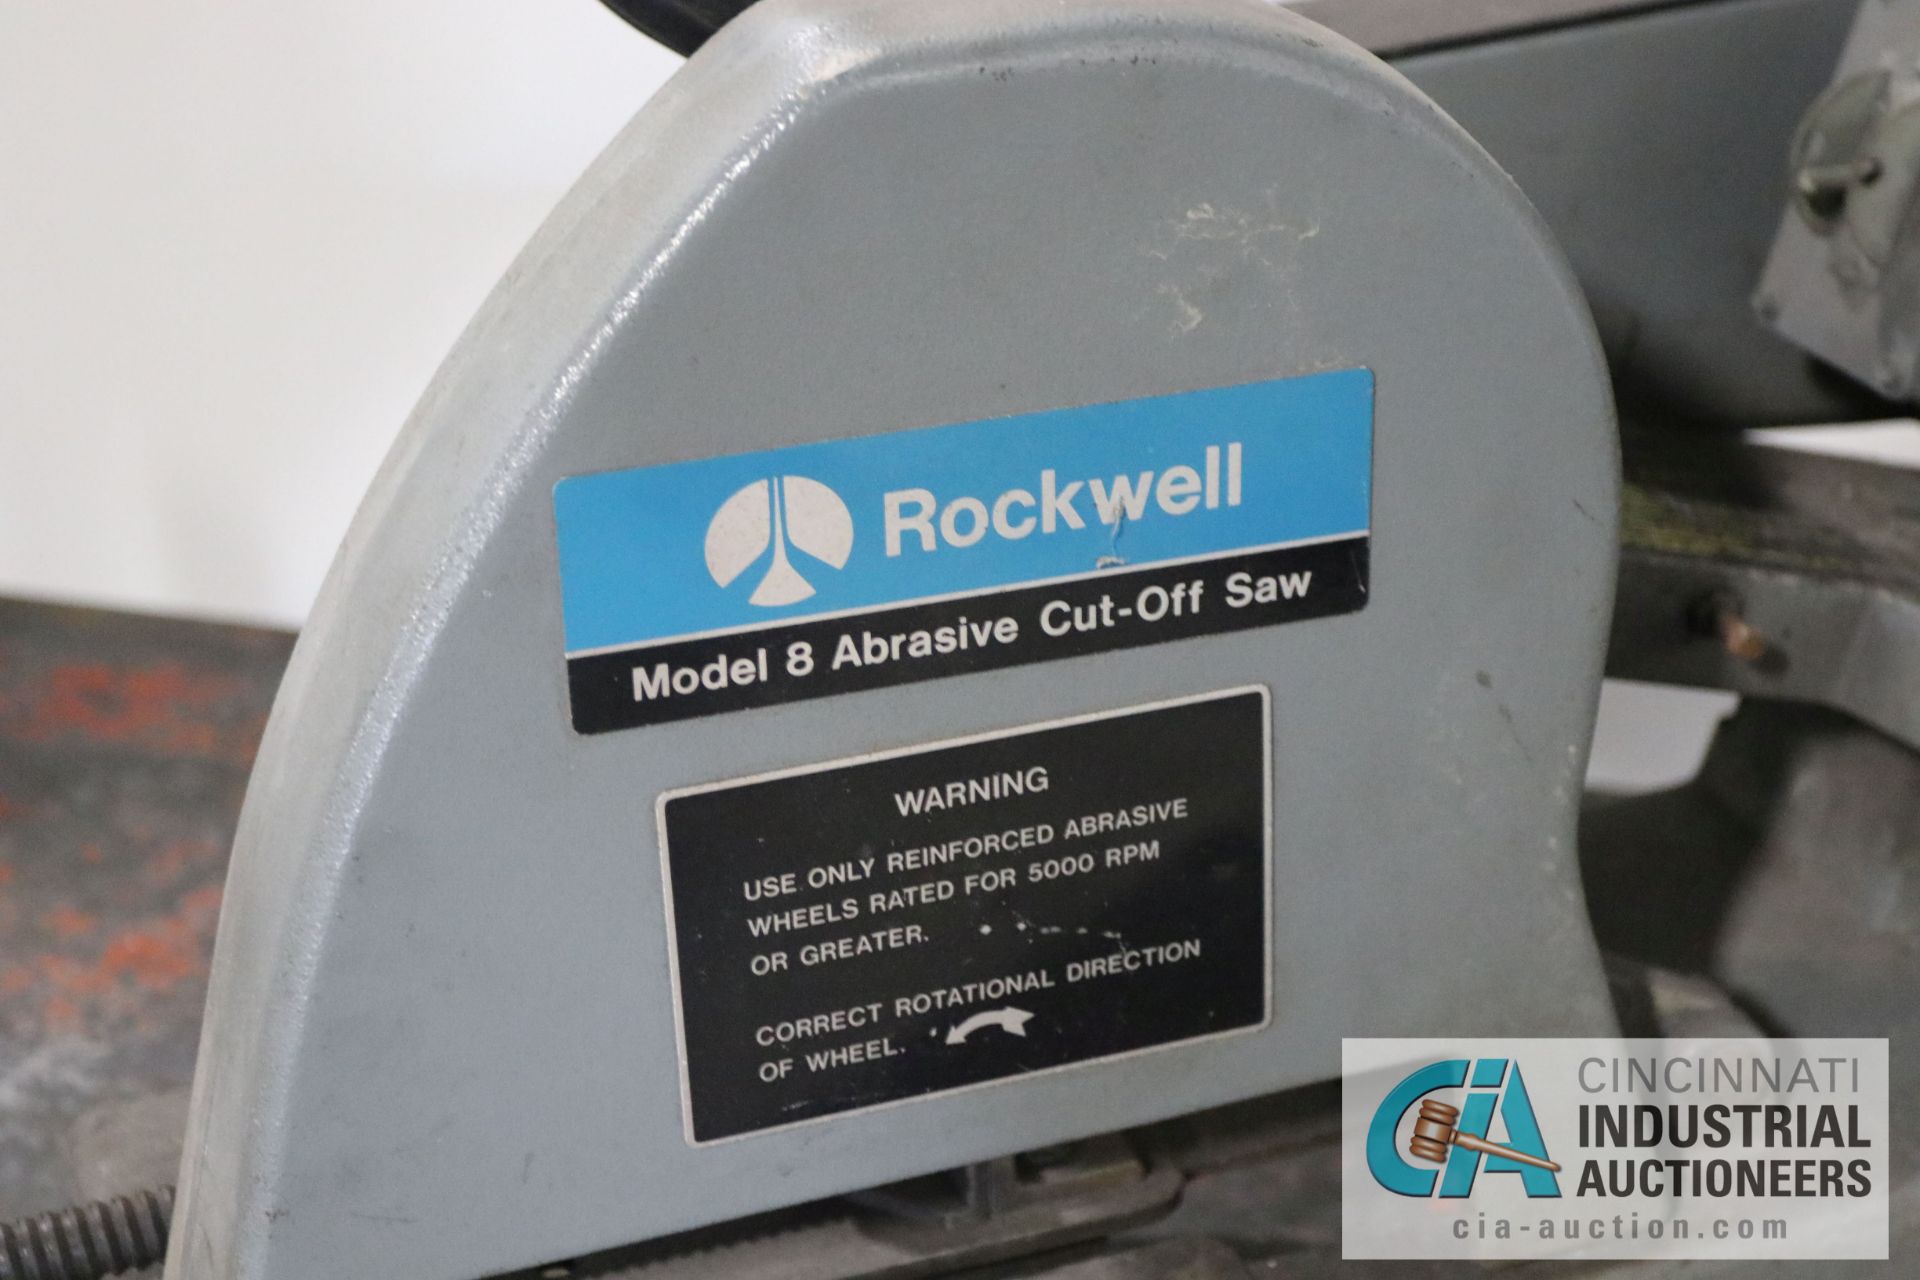 3 HP ROCKWELL MODEL 8 ABRASIVE CUTOFF SAW; S/N 438-02-3140808, SINGLE PHASE - Located in Holland, - Image 2 of 5